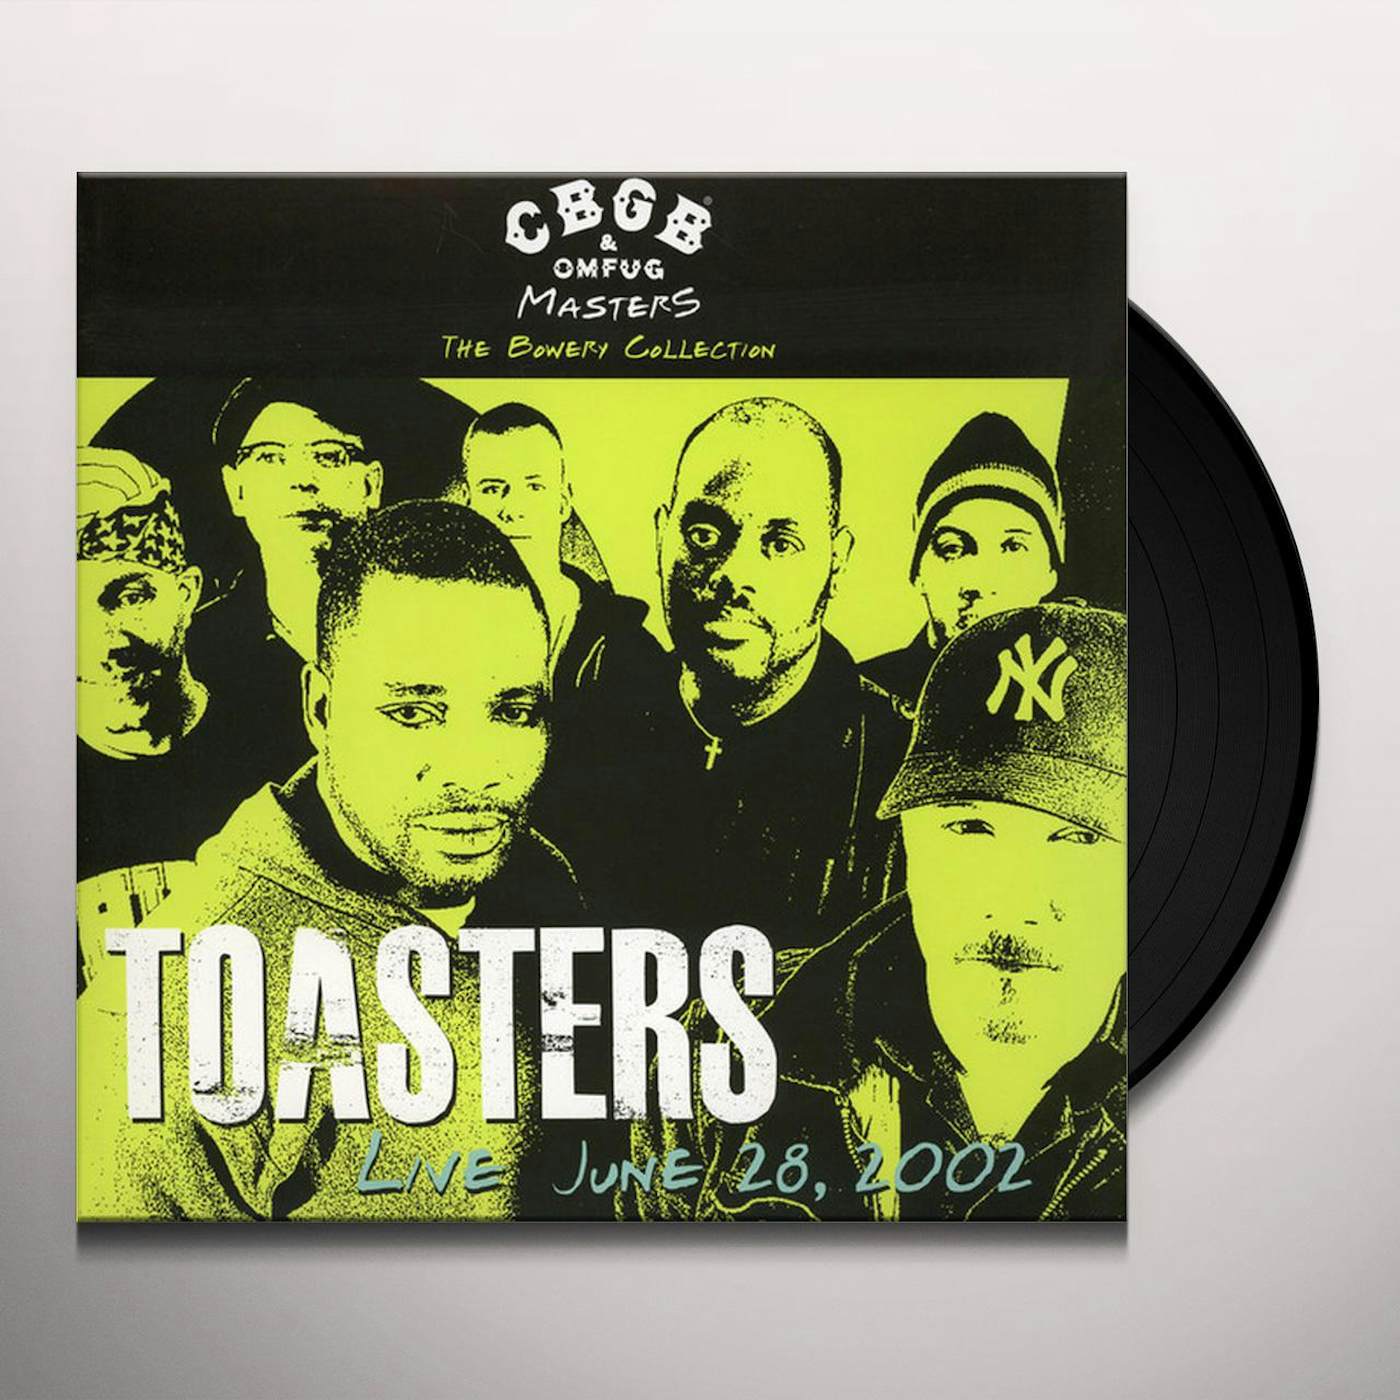 The Toasters CBGB OMFUG MASTERS: LIVE JUNE 28 2002 BOWERY Vinyl Record